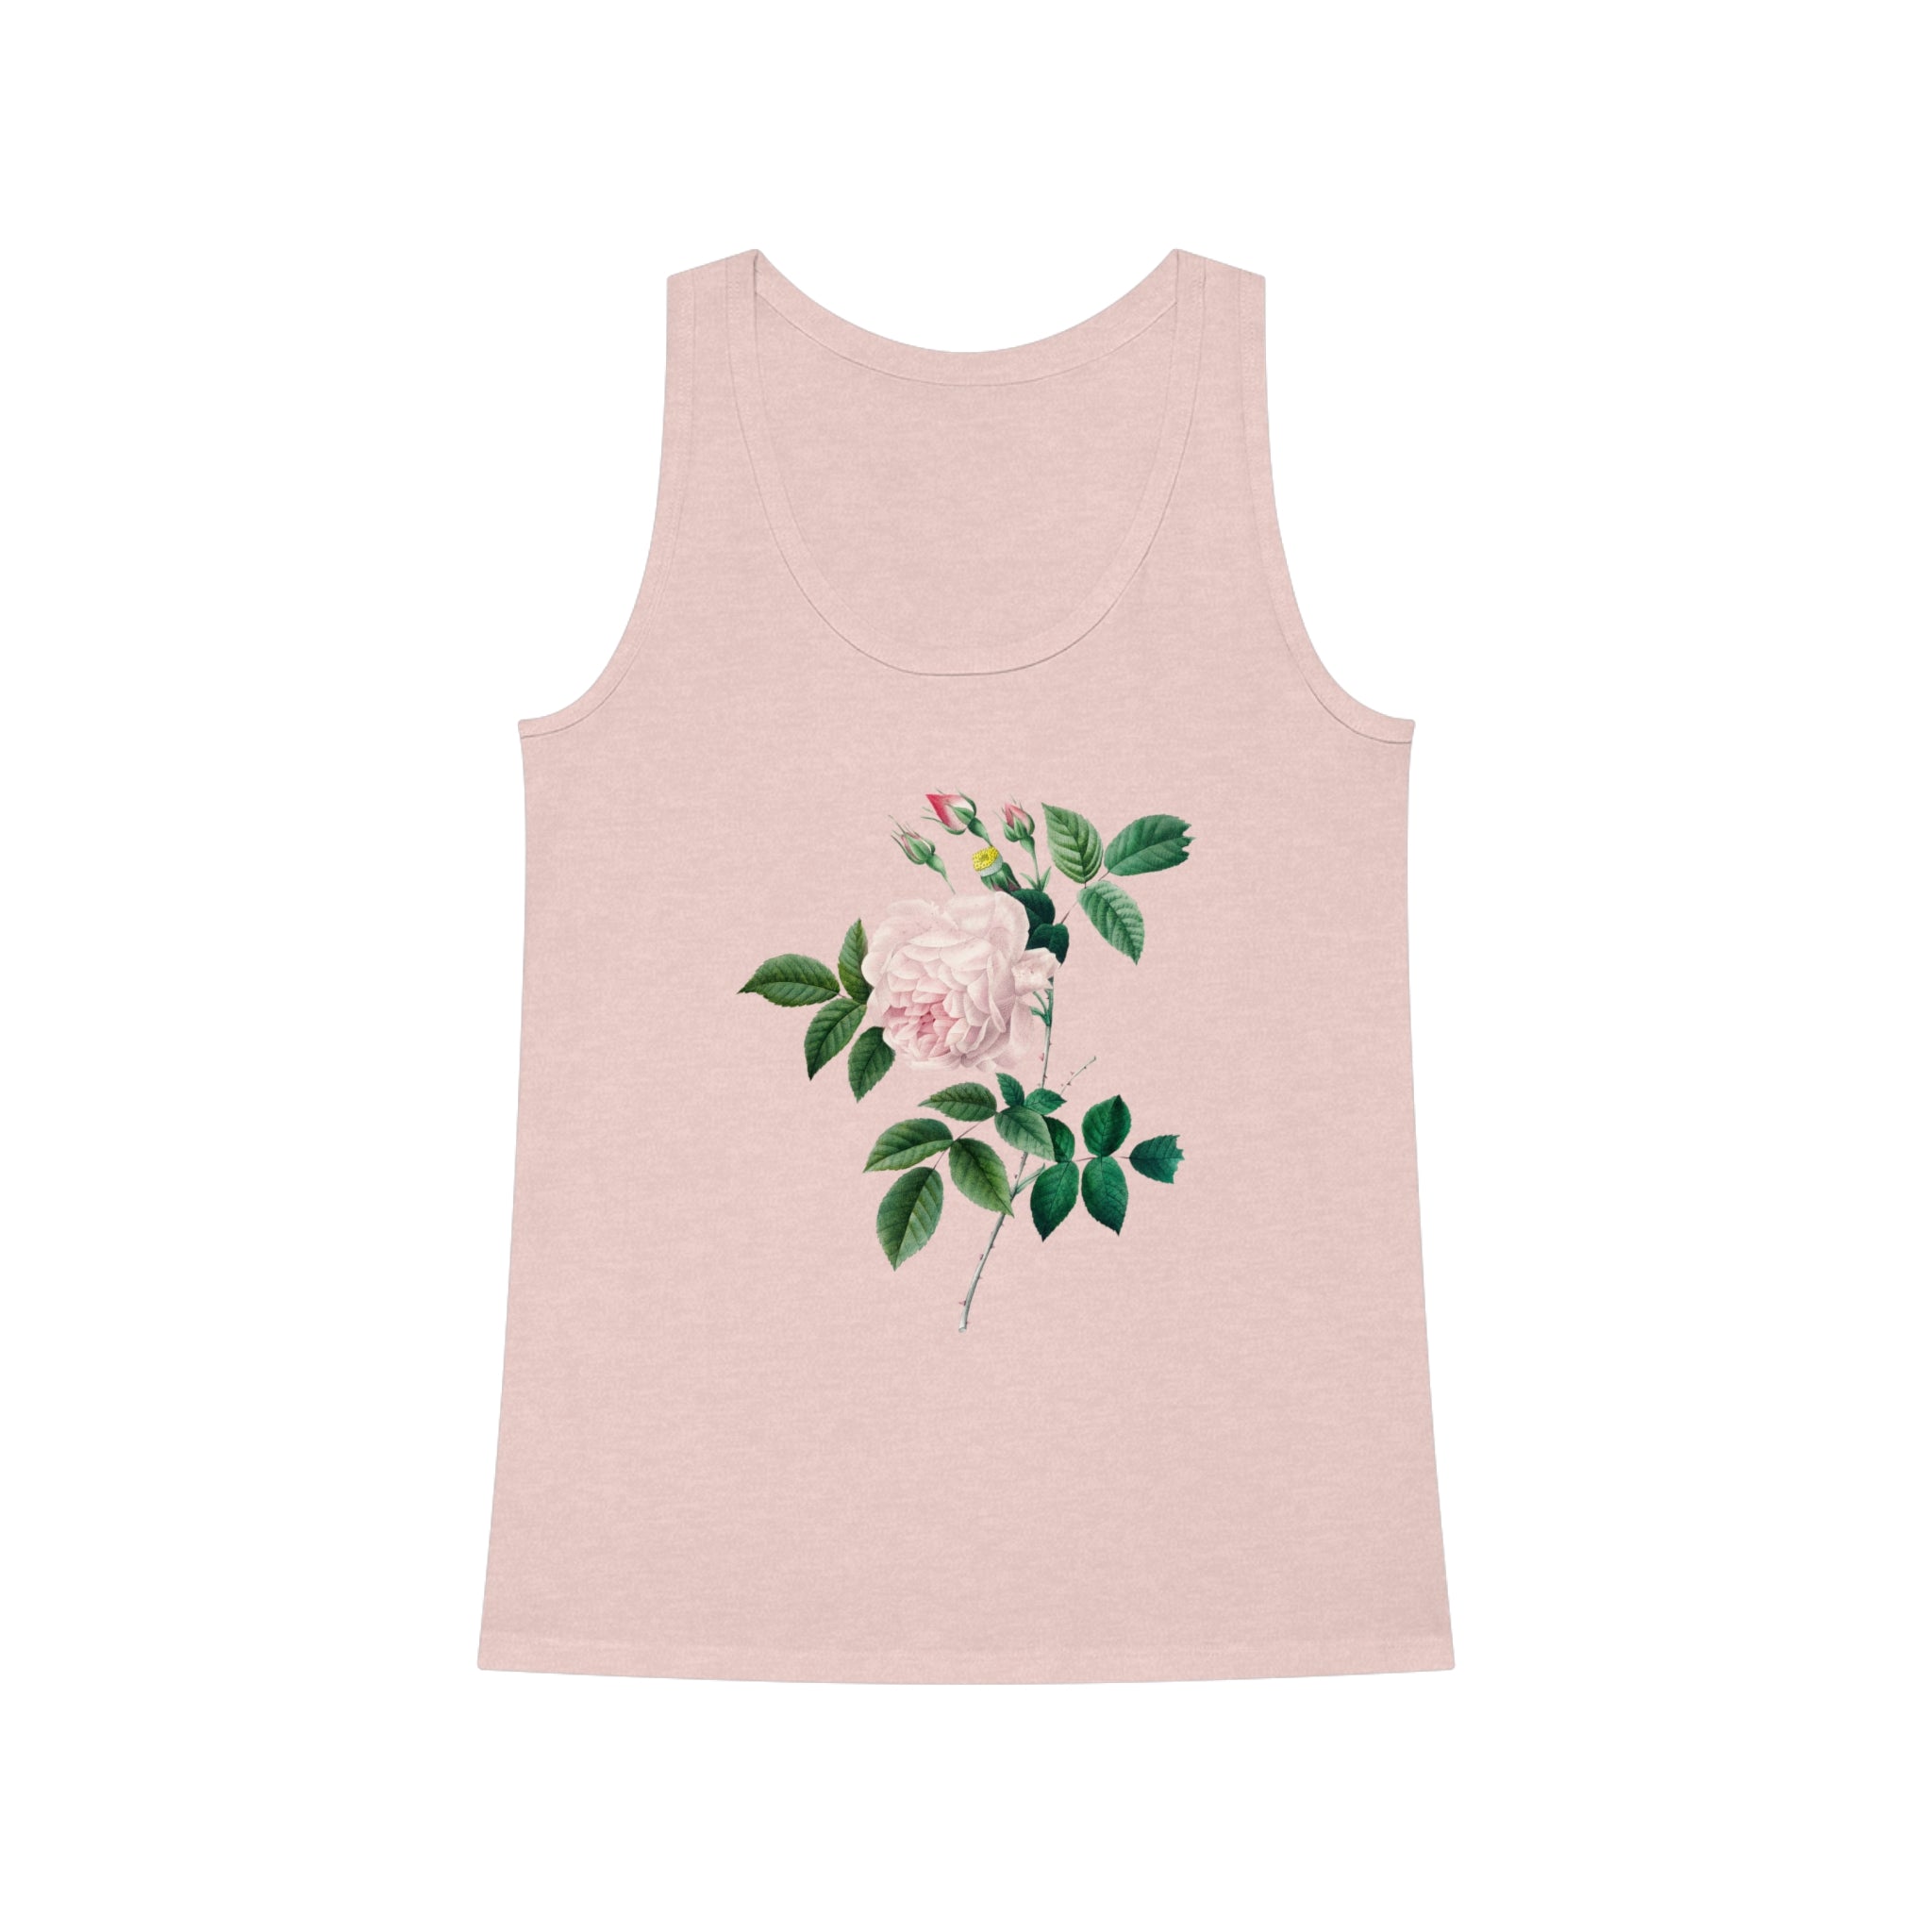 An organic cotton Rose Tank Top featuring a pink rose, perfect for yoga practice.